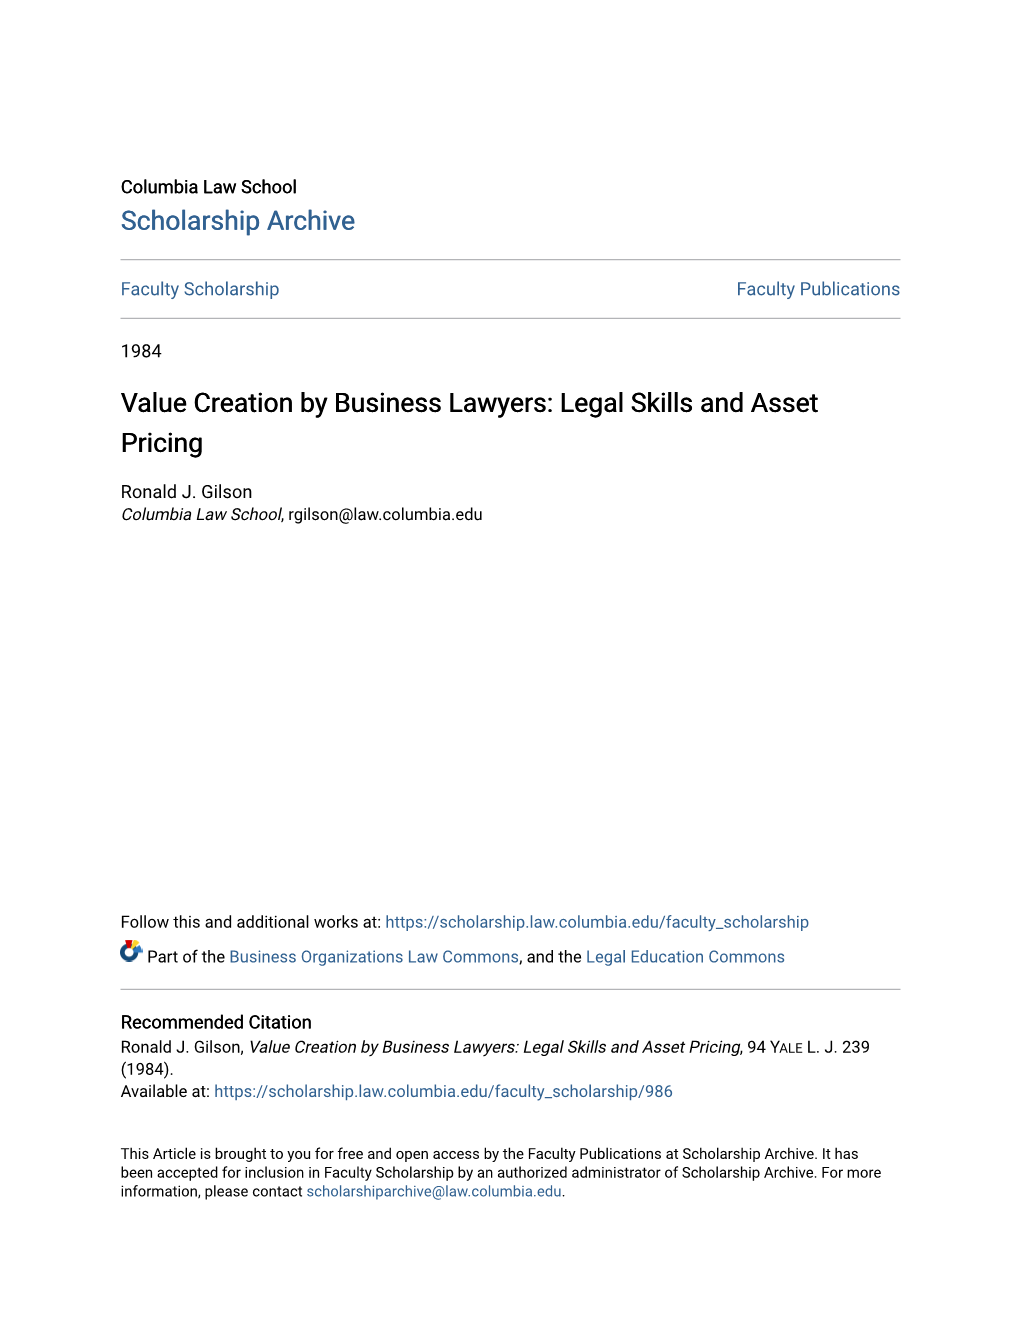 Value Creation by Business Lawyers: Legal Skills and Asset Pricing